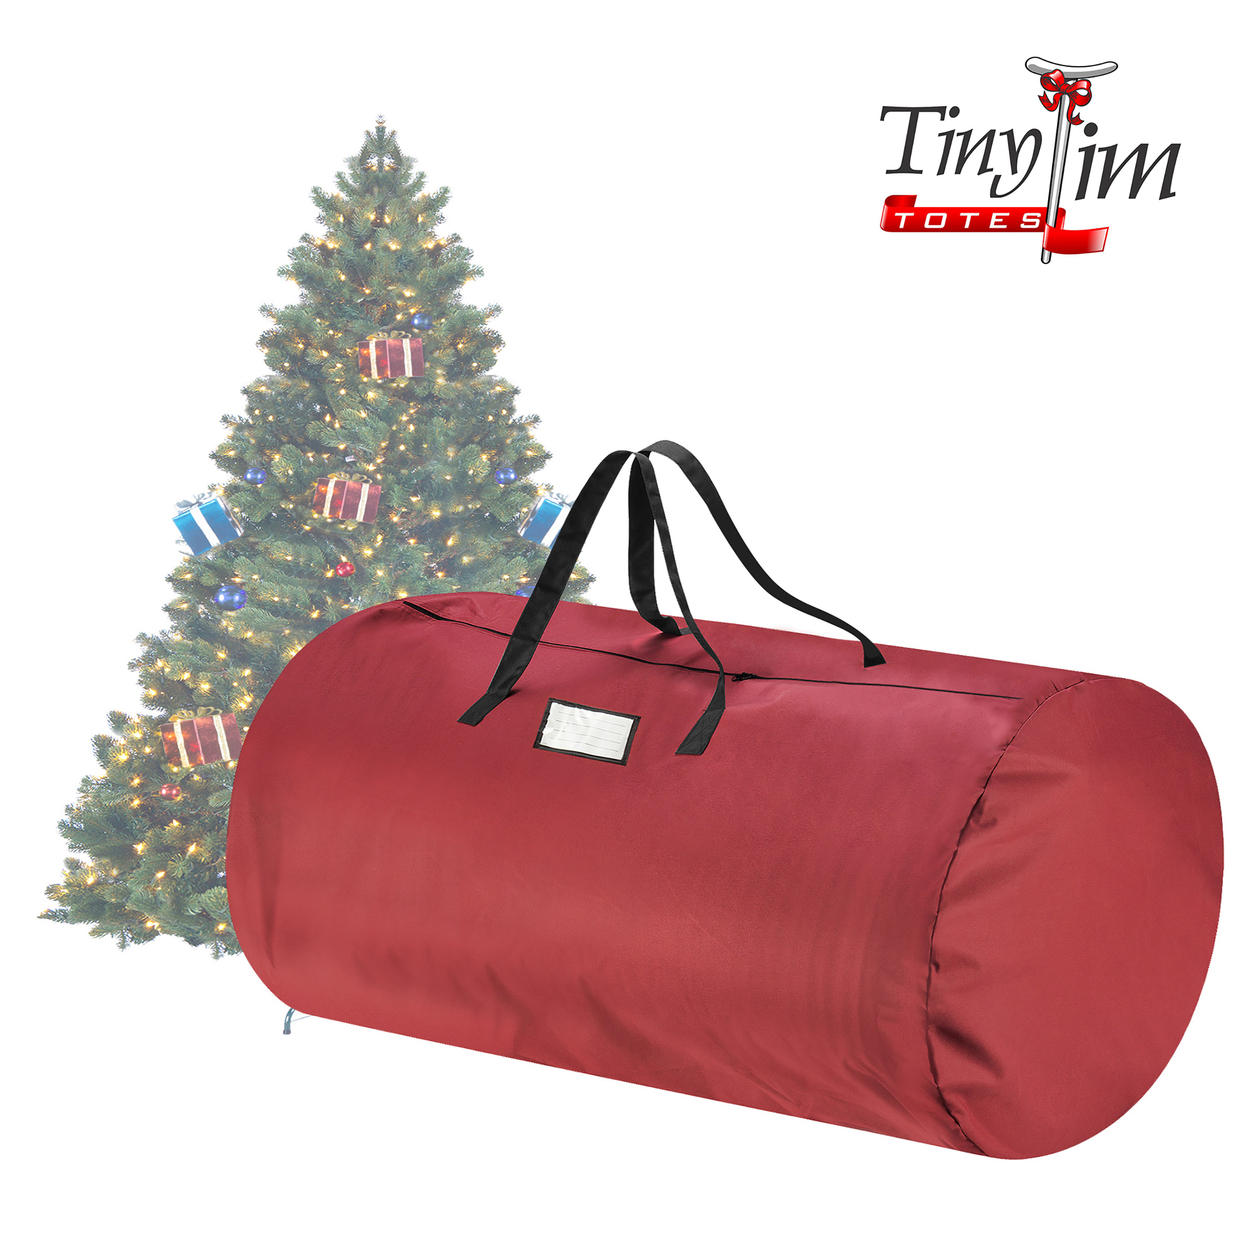 Red Holiday Christmas Tree Canvas Zippered Storage Bag Large For 9 Foot Tree